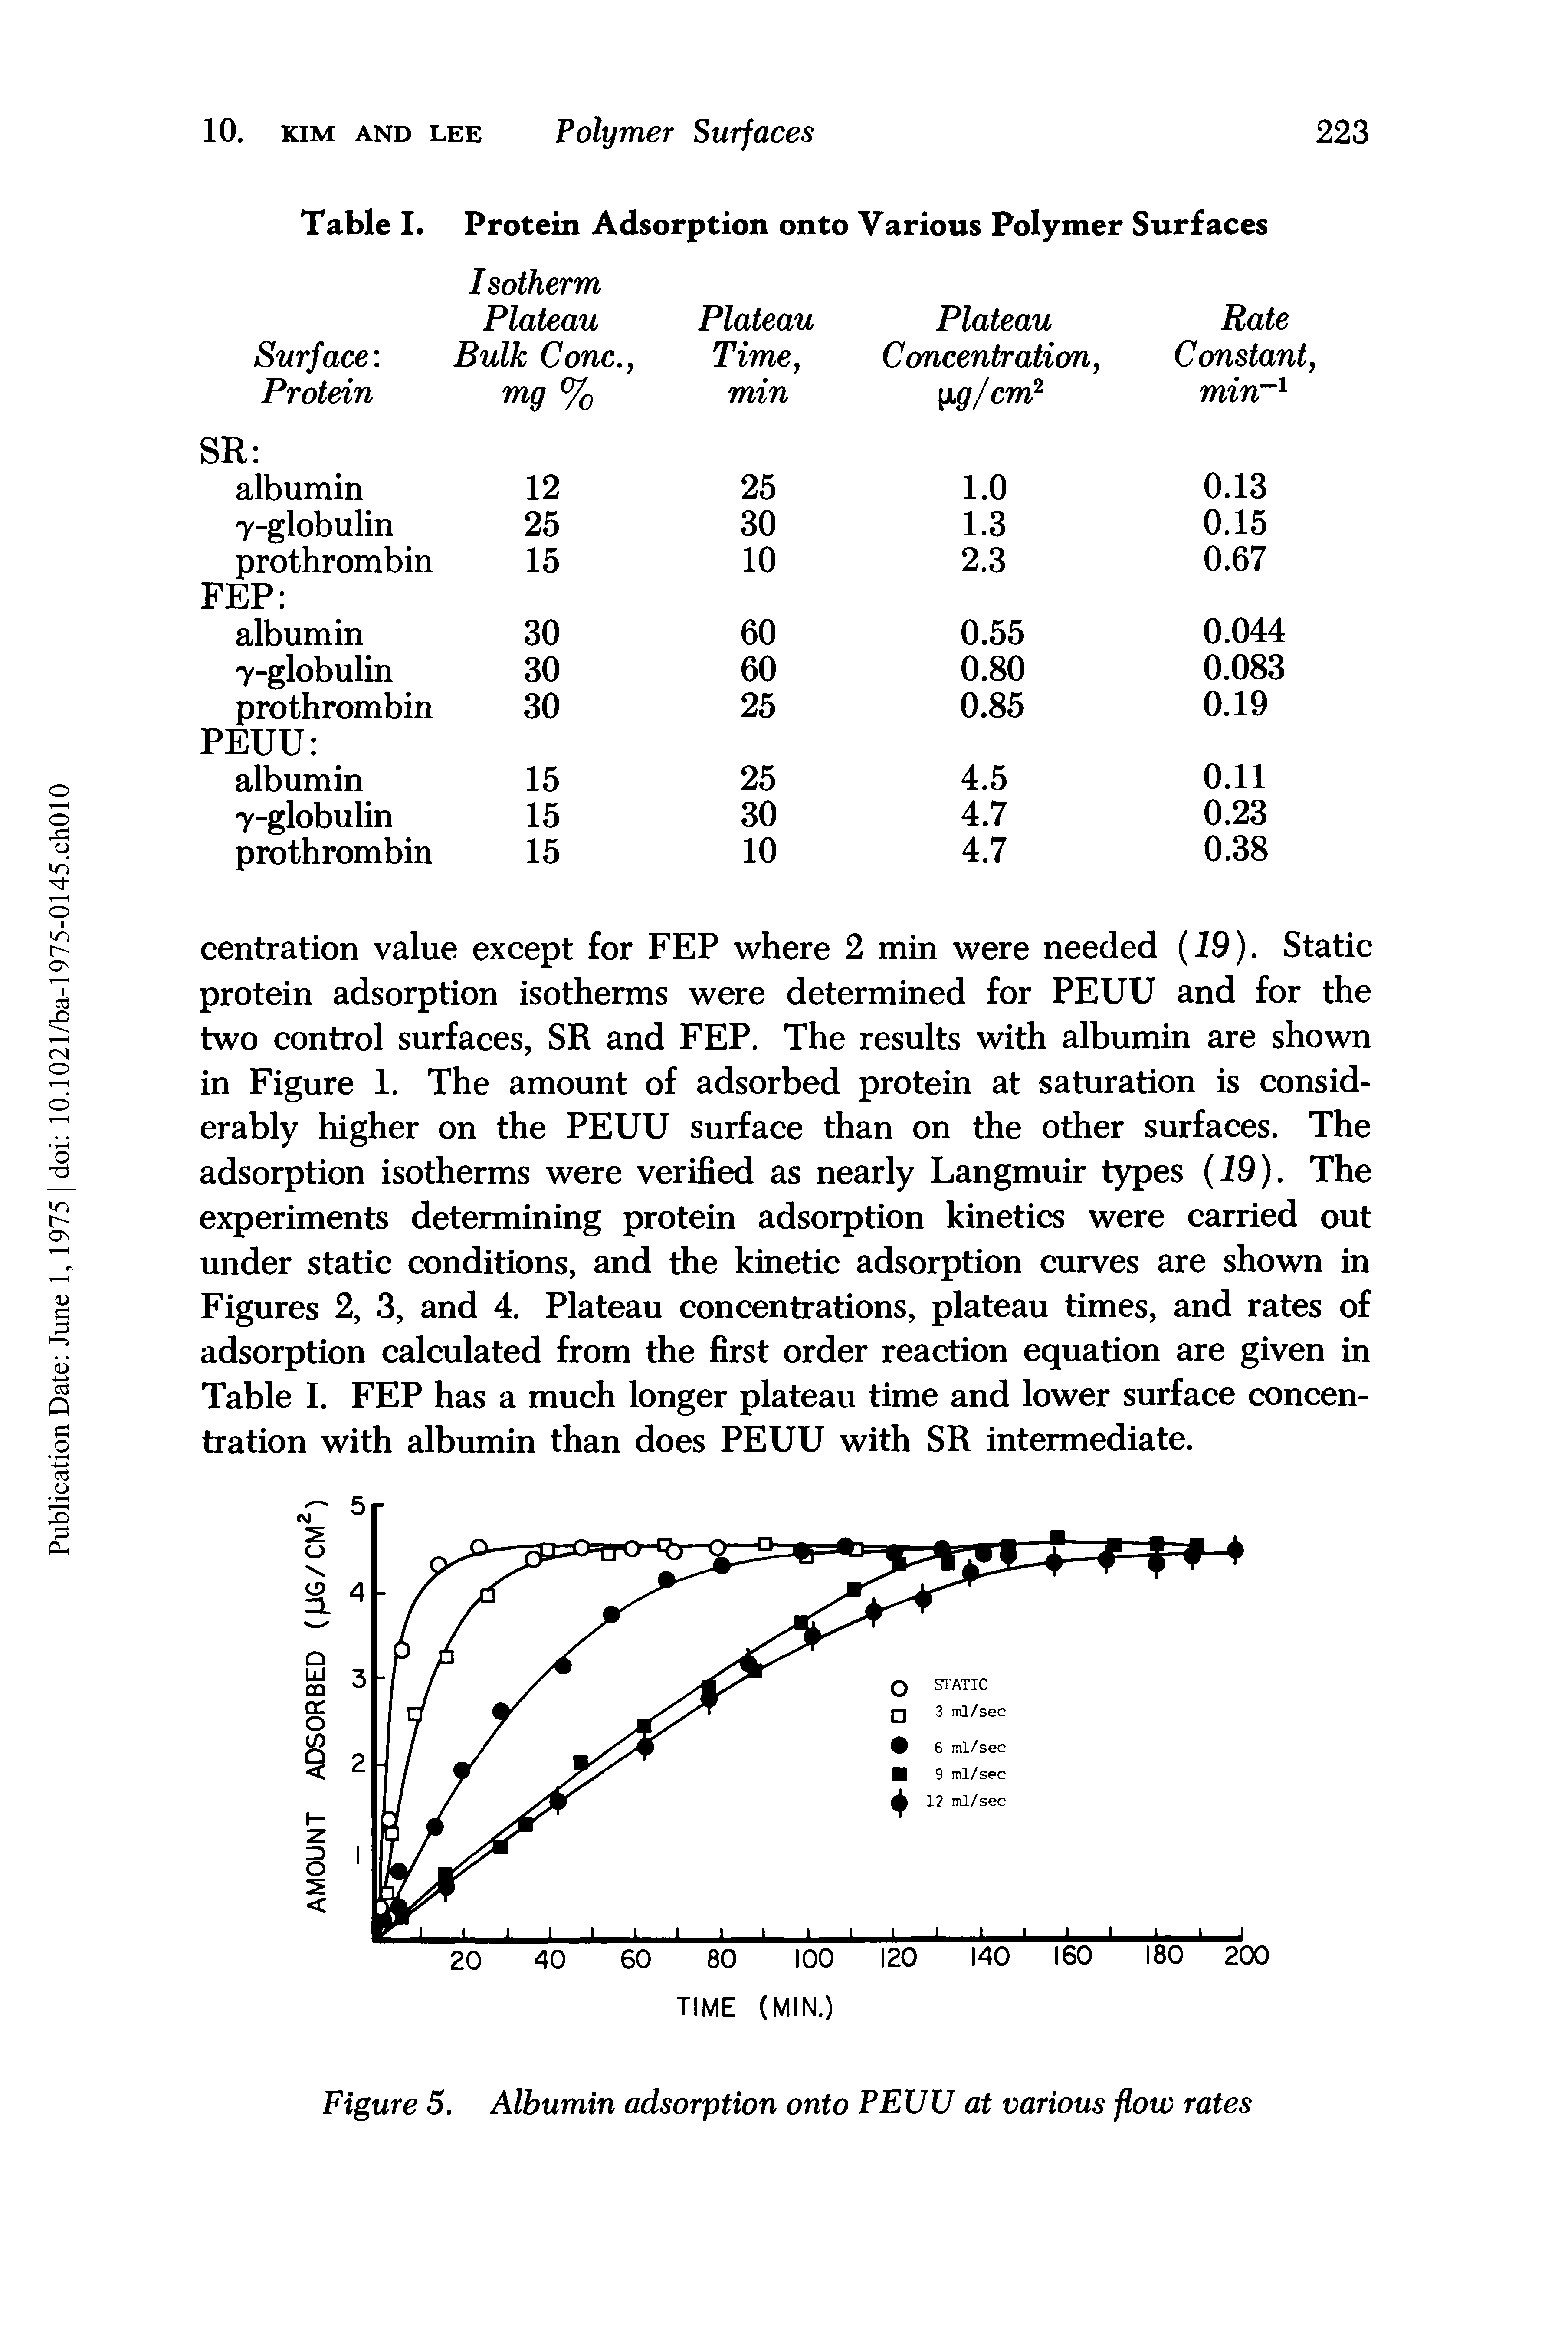 Table I. Protein Adsorption onto Various Polymer Surfaces...